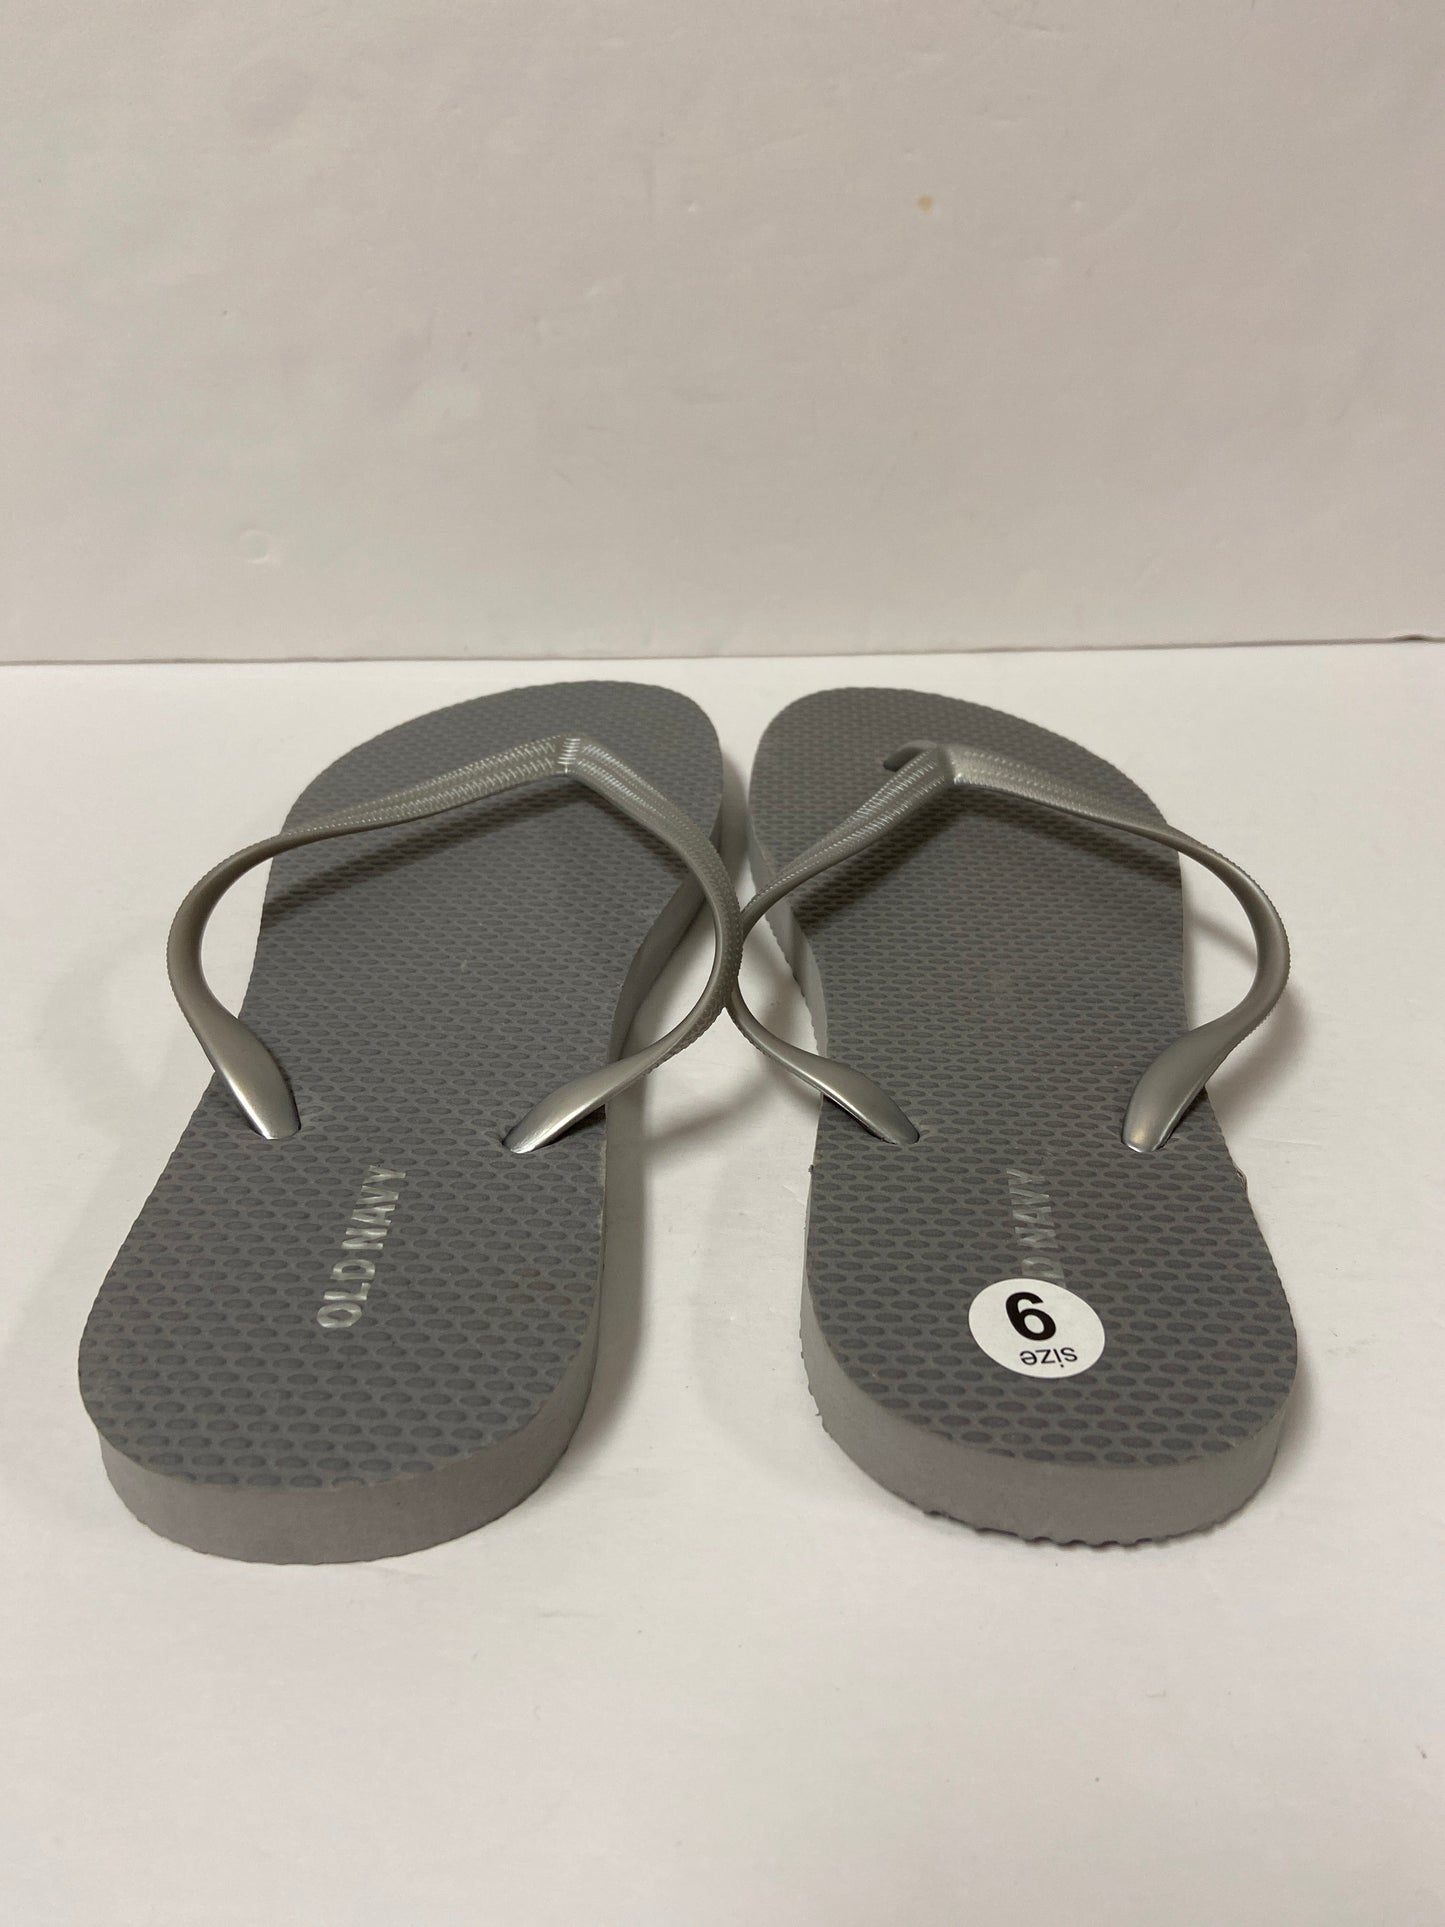 Sandals Flip Flops By Old Navy  Size: 9